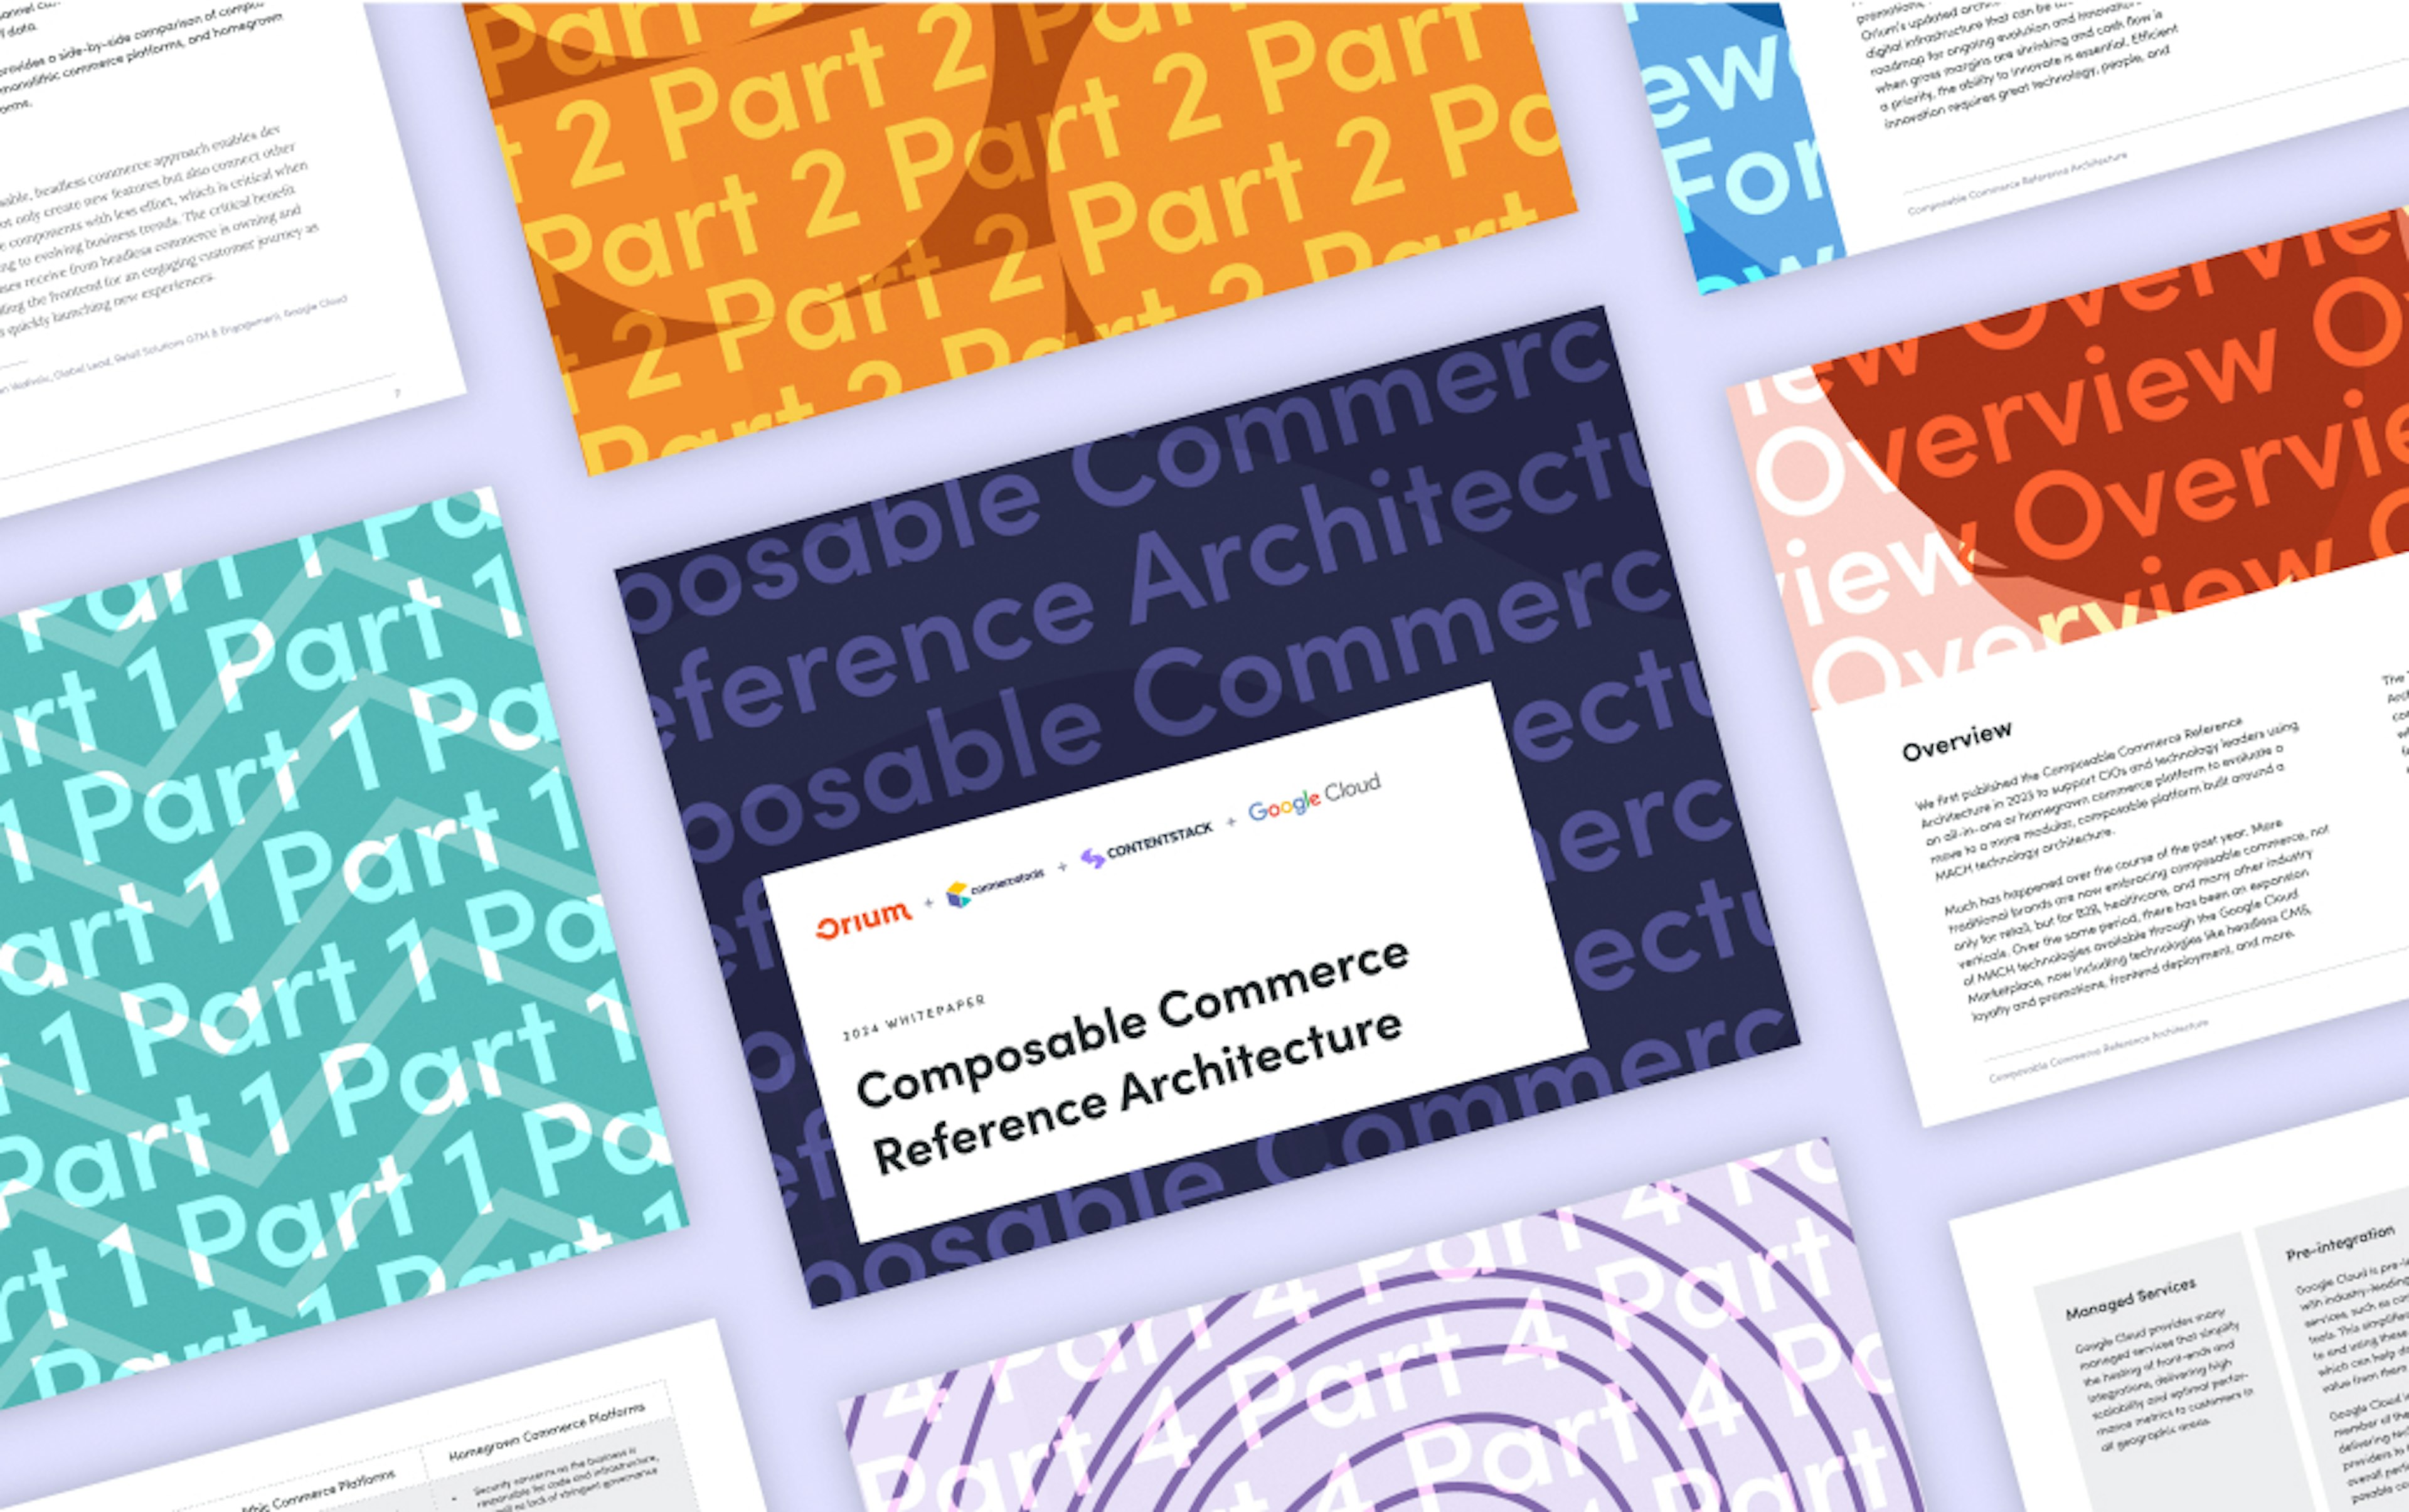 Multiple pages from the Composable Commerce Reference Architecture whitepaper on a purple background in a diagonal pattern.